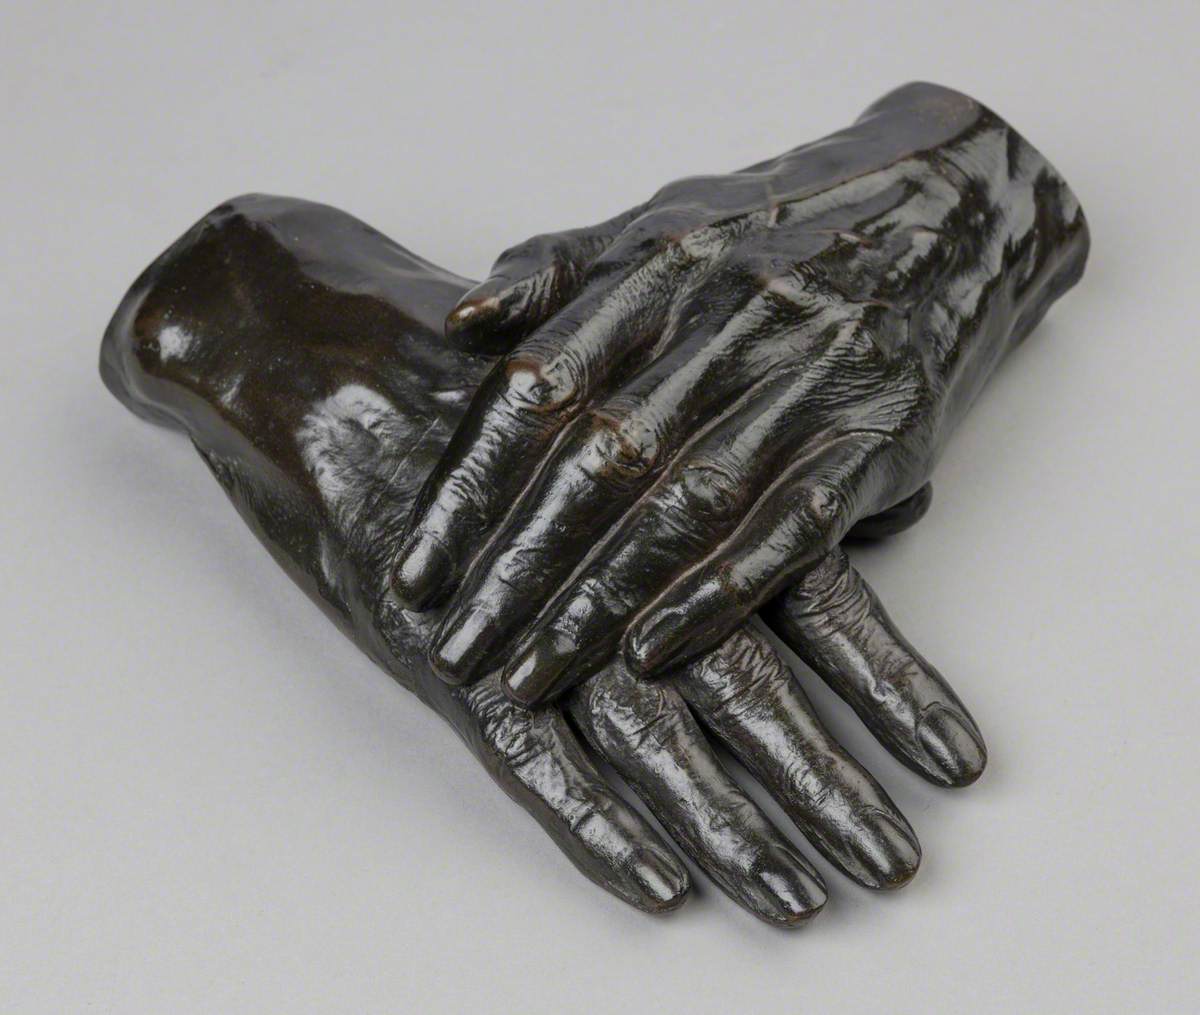 Hands of Thomas Carlyle (1795–1881)